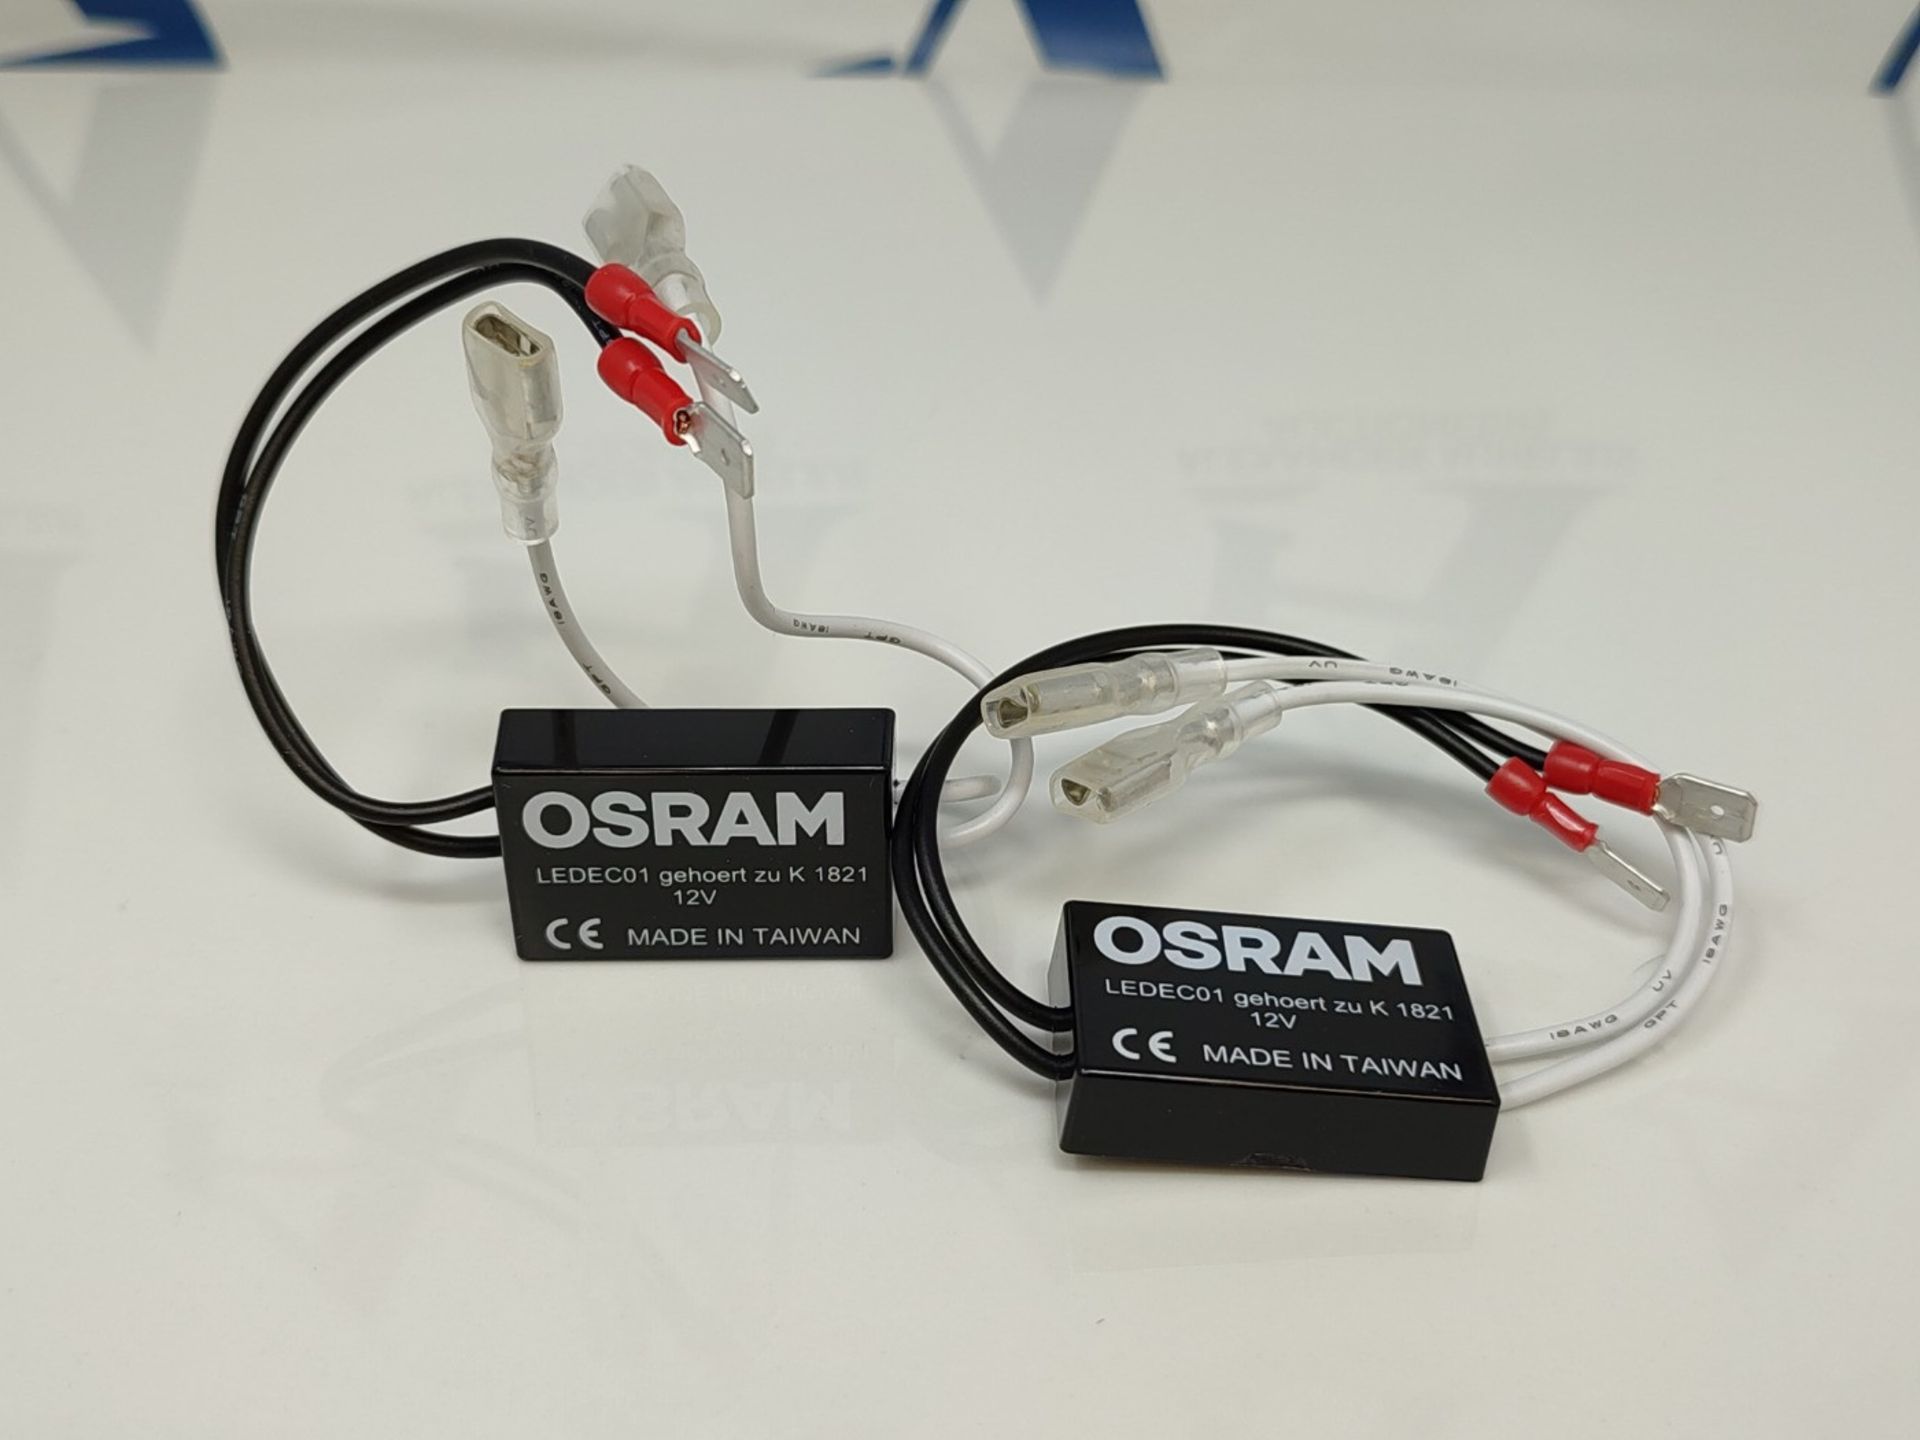 OSRAM LEDriving ERROR CANCELLER, LEDEC01, is used to bypass the vehicle's lamp failure - Image 3 of 3